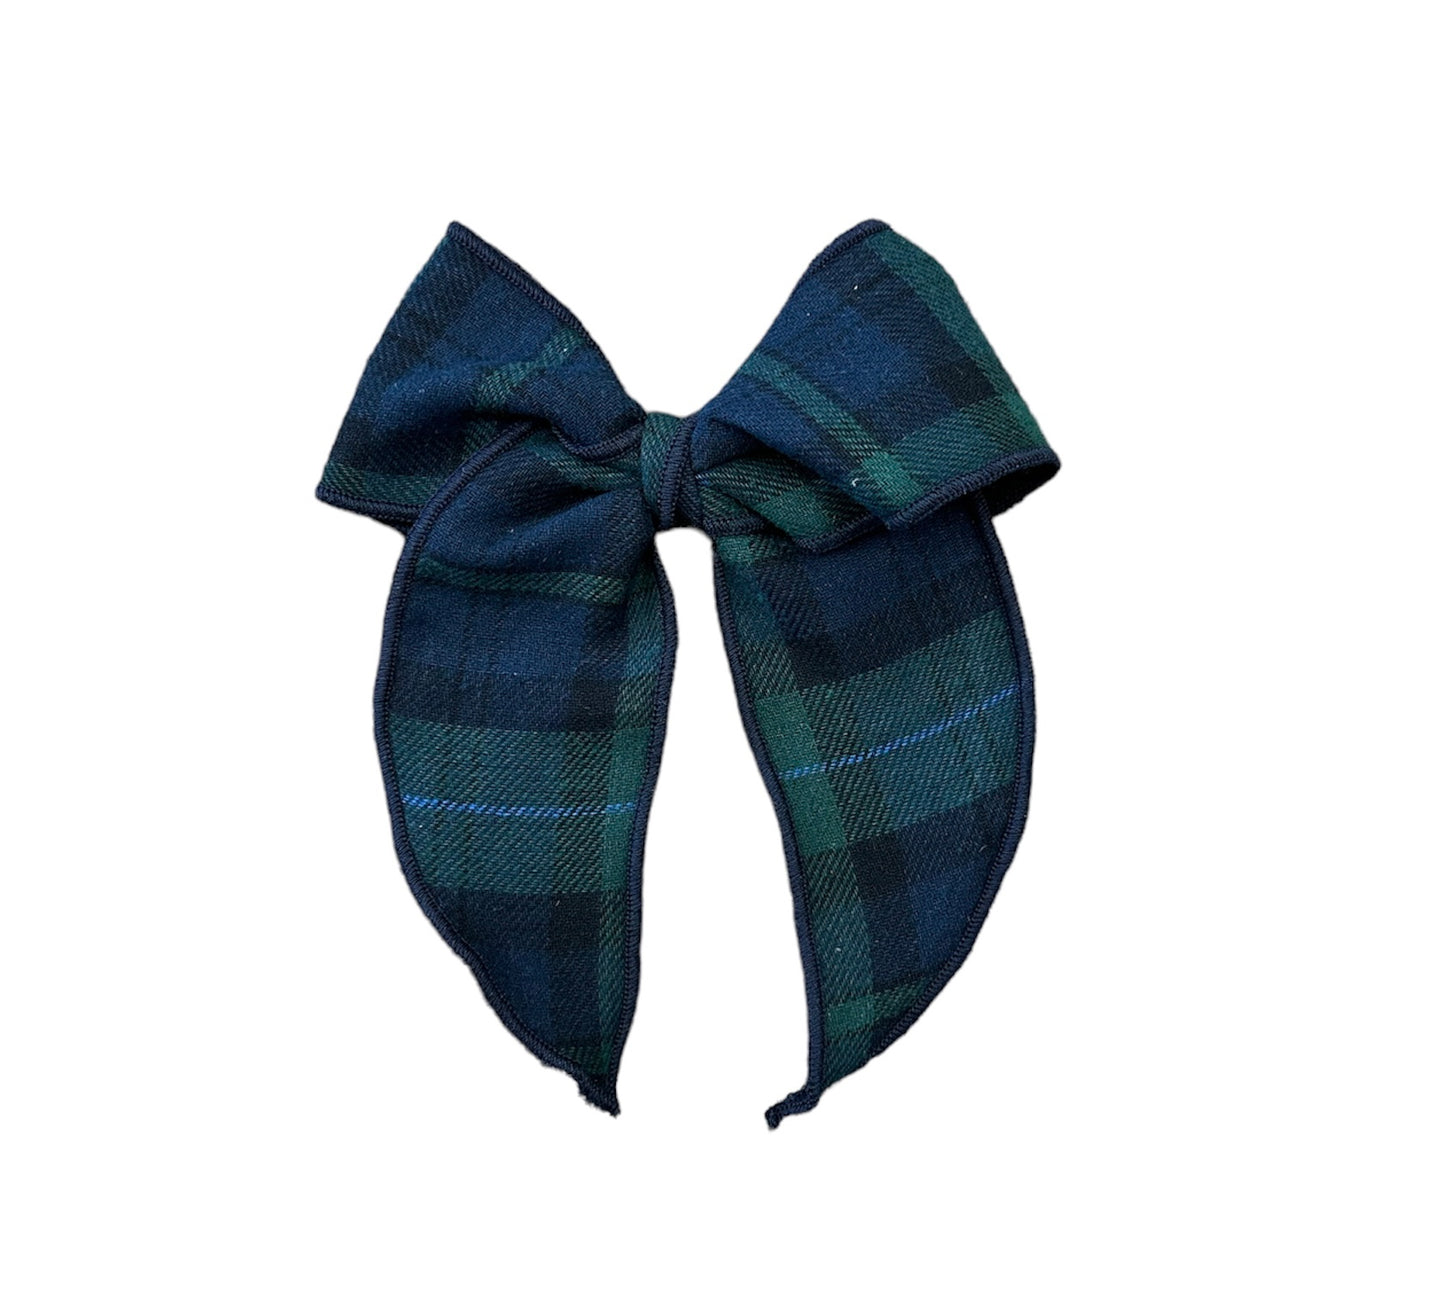 Wee Ones Black Watch Plaid Flannel Fabric Bows